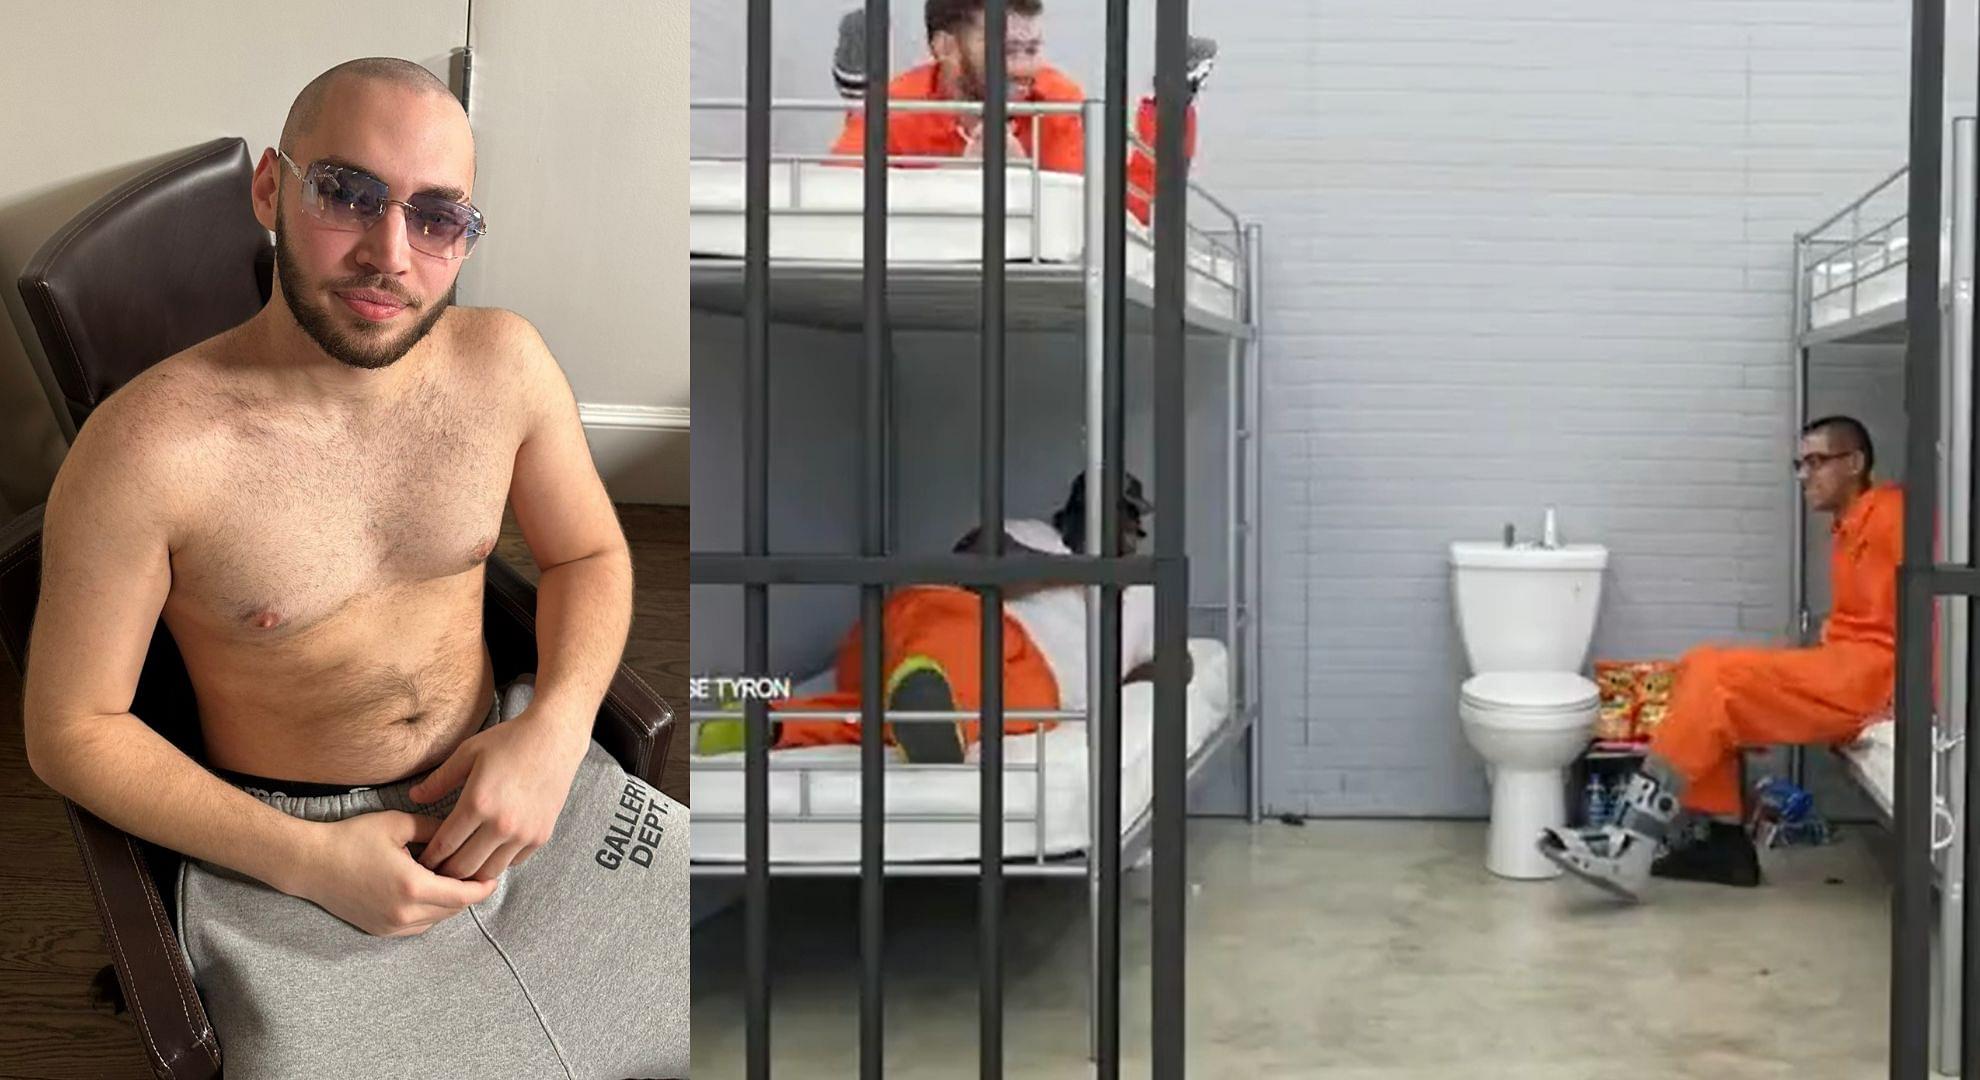 Adin Ross organizes a prison stream with N3on, Sneako, and ShnaggyHose